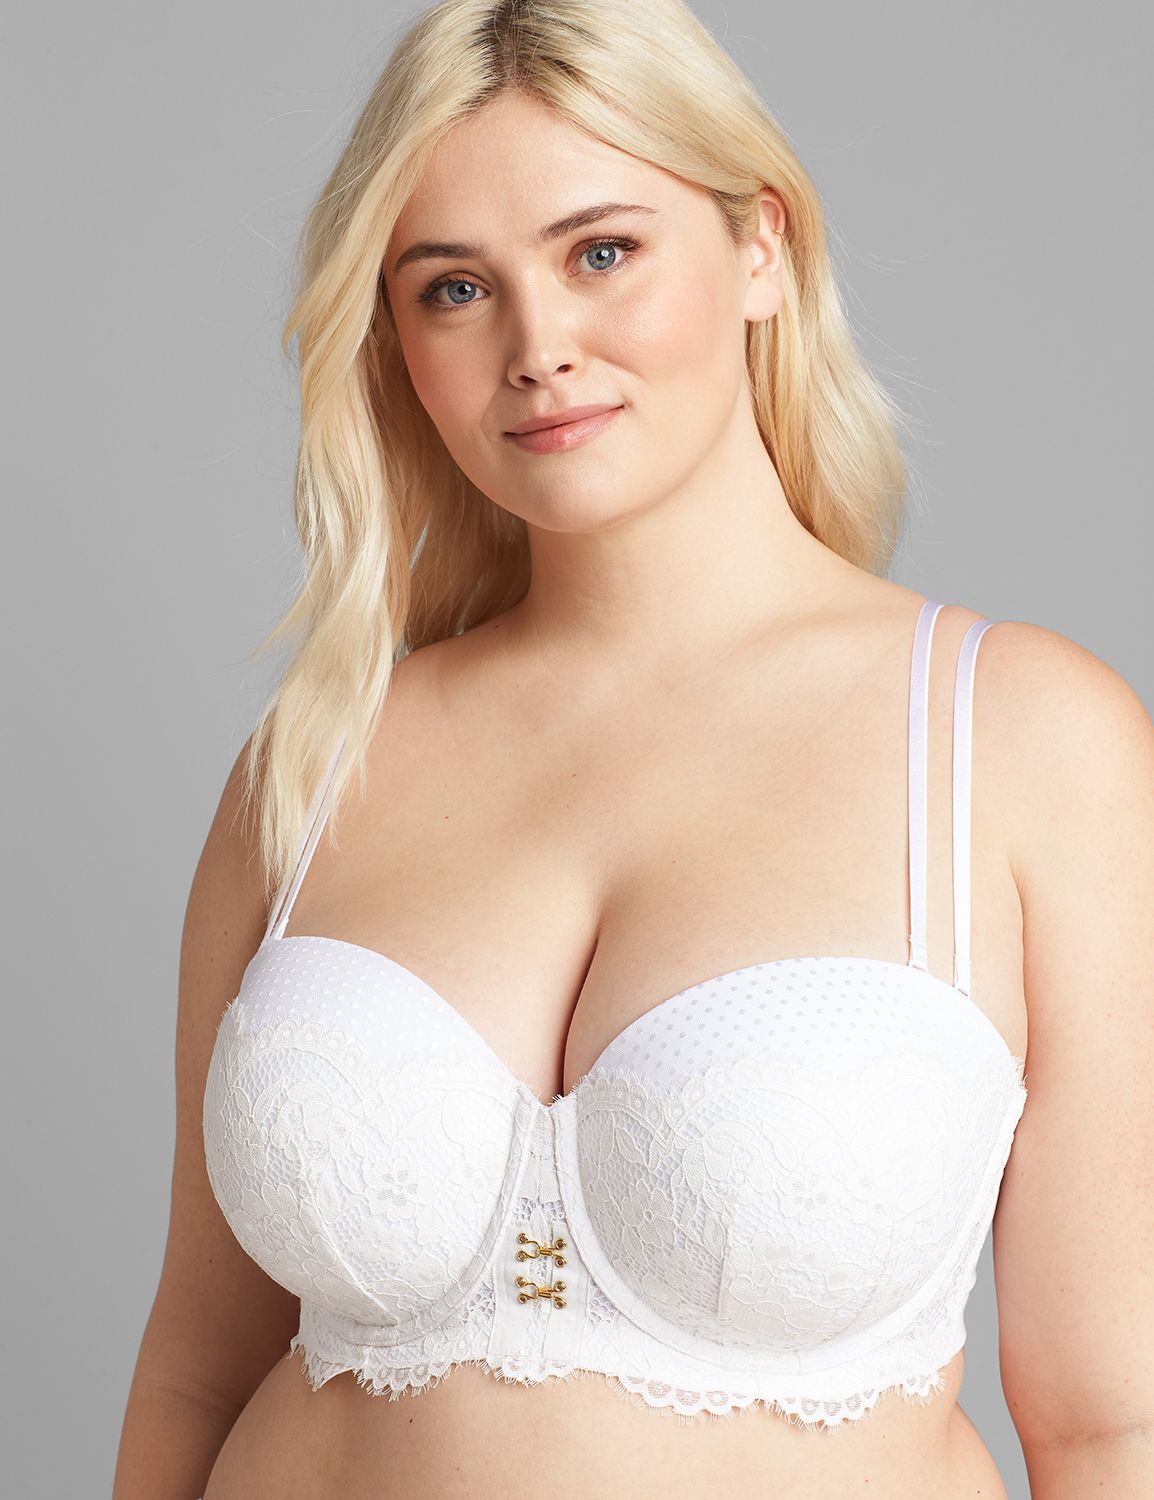 Lane Bryant - THE strapless bra of the summer. Cacique Boost Strapless, now  in 86 sizes! Bands 32-50. Cups A-K. #ForTheLoveOfCurves Shop